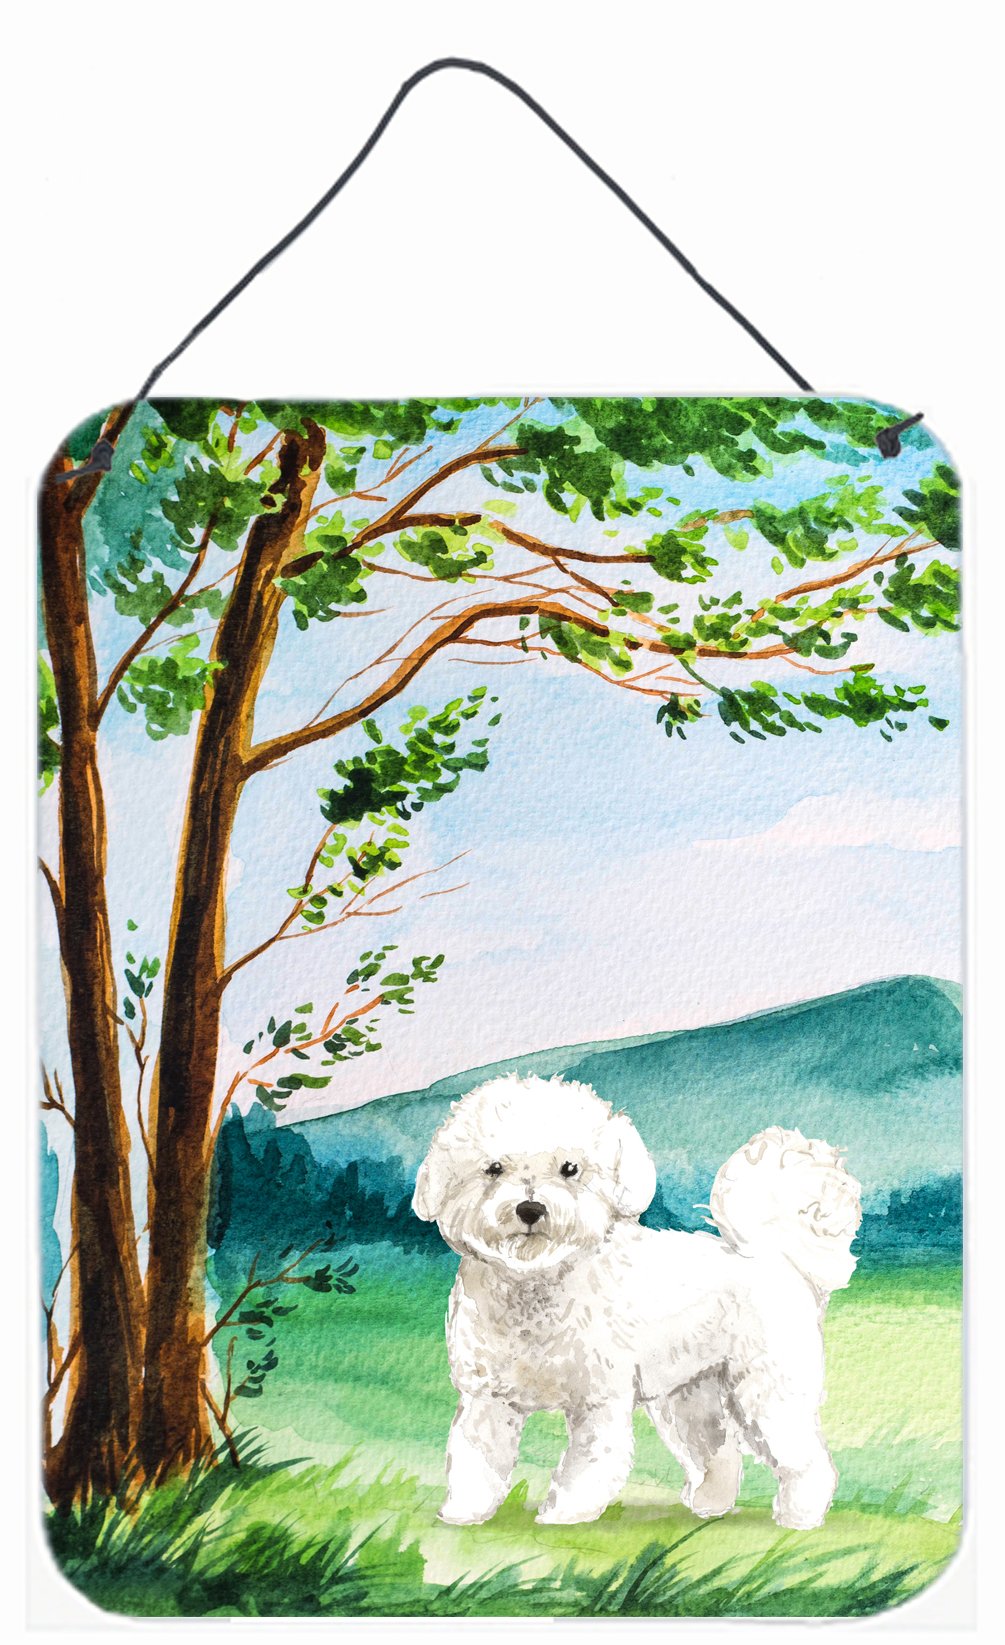 Under the Tree Bichon Frise Wall or Door Hanging Prints CK2582DS1216 by Caroline's Treasures